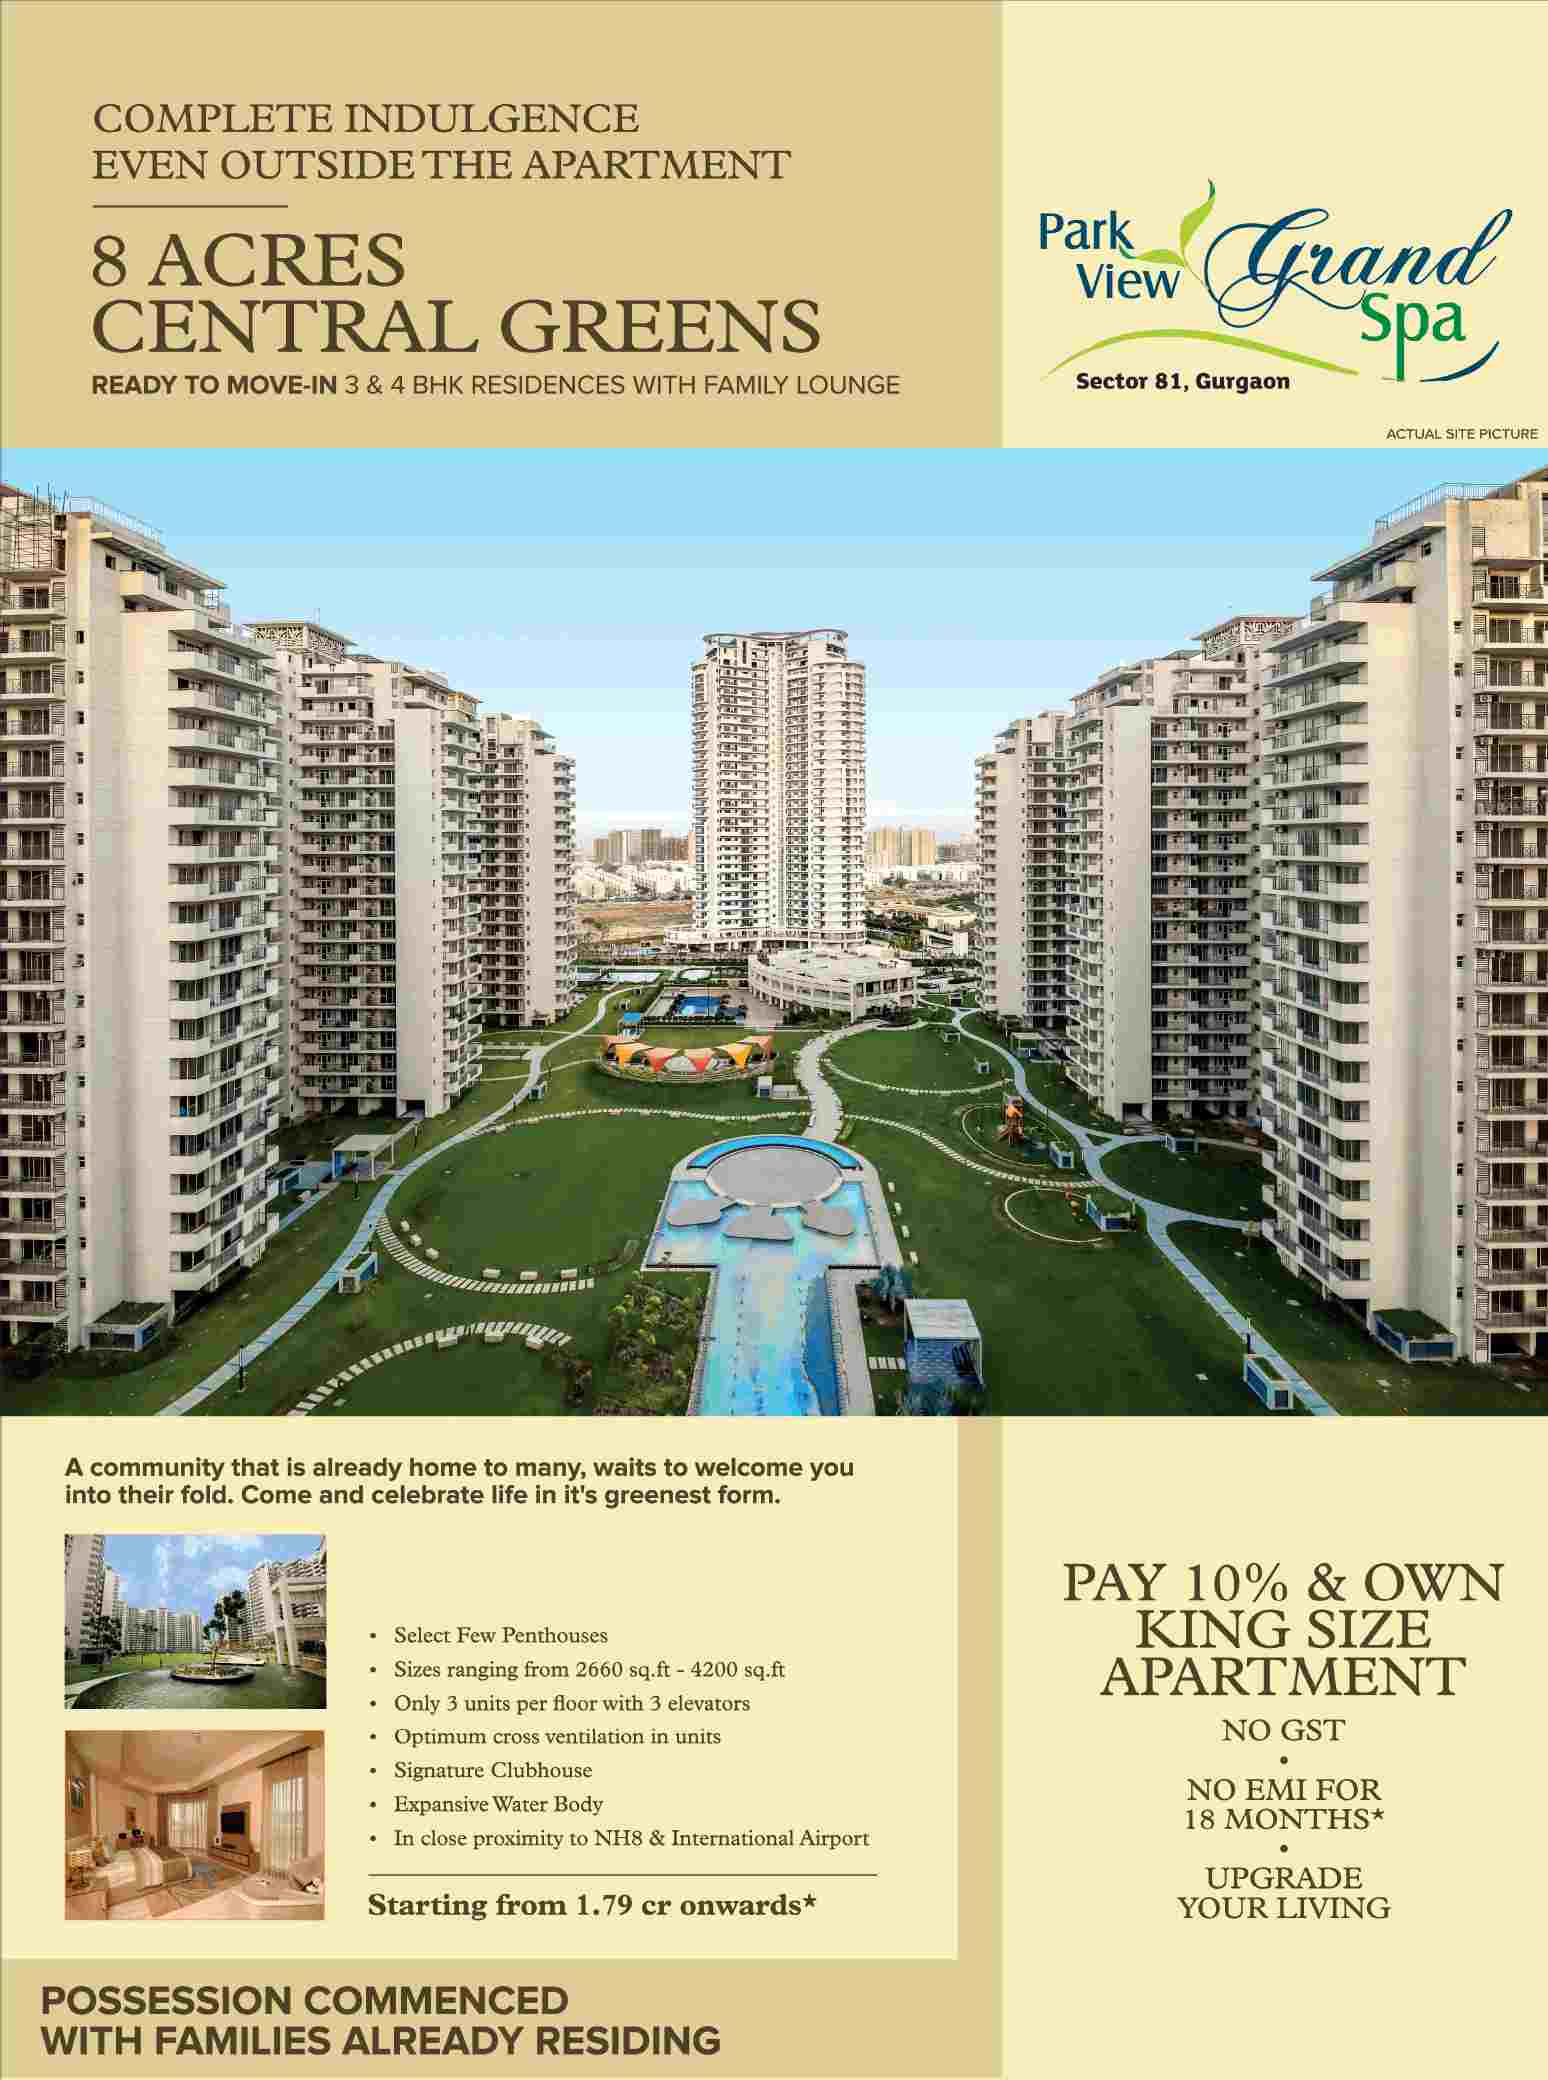 Pay 10% & Own King Size Apartment at Bestech Park view Grand Spa, Gurgaon Update